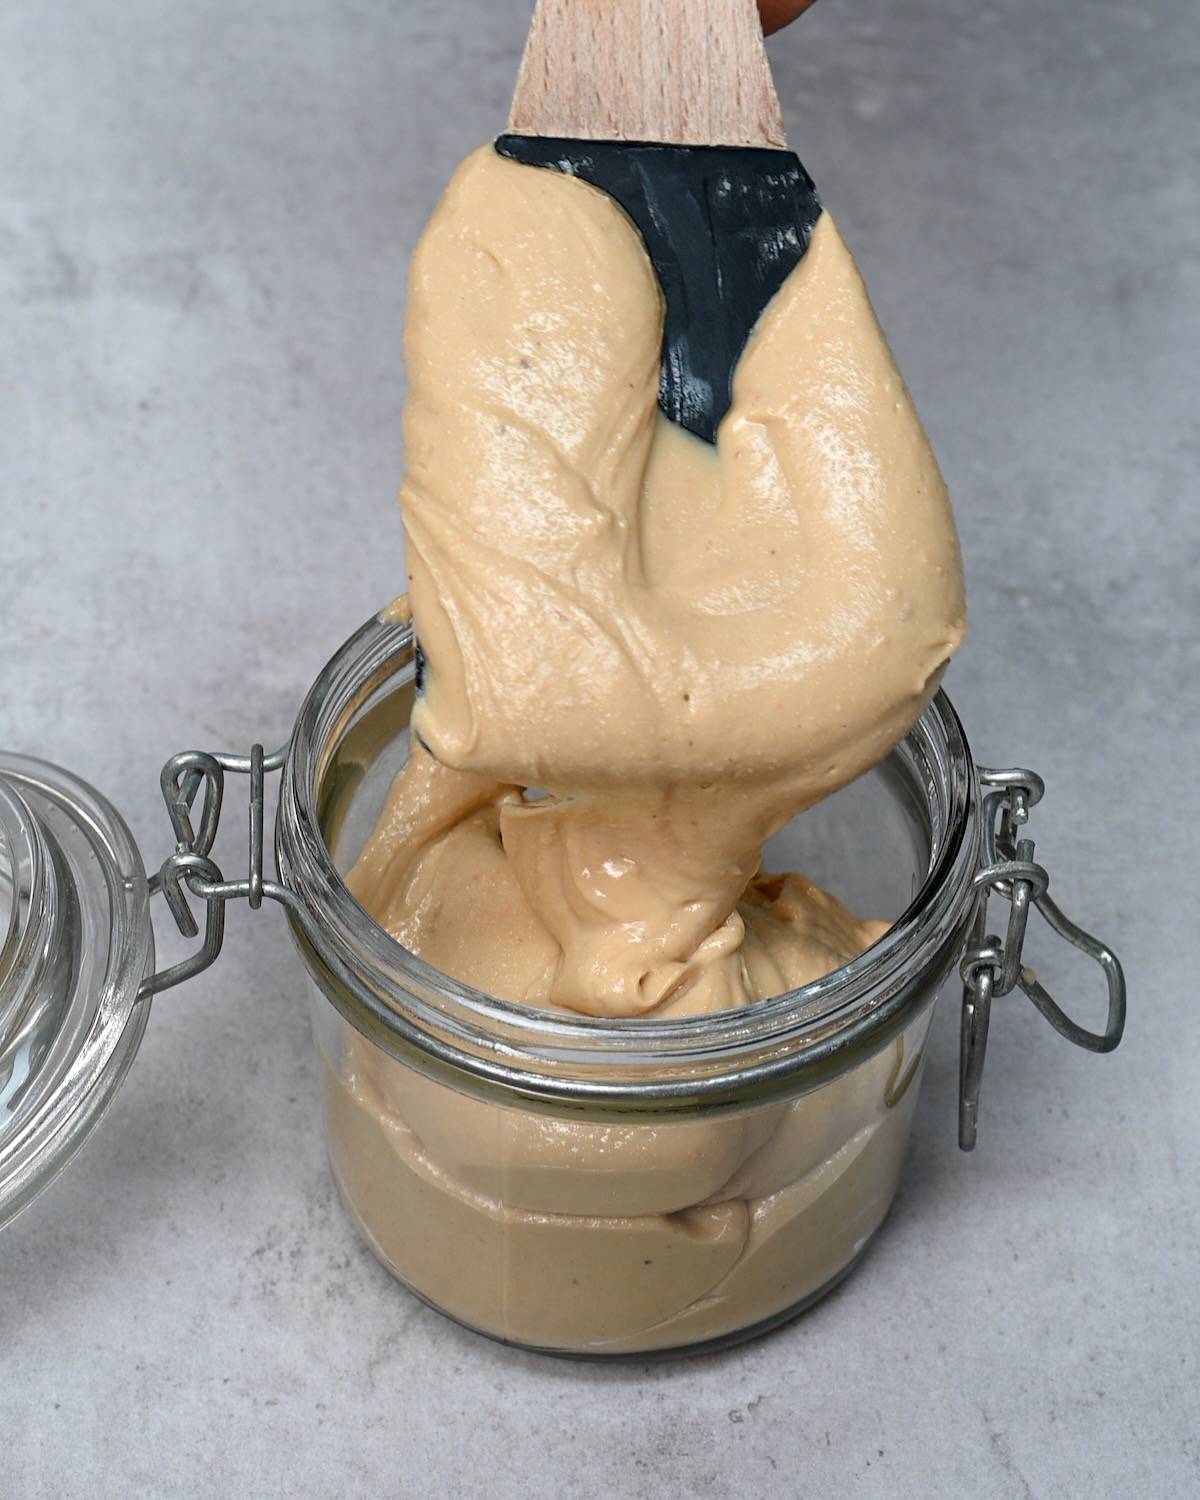 Filling a jar with cashew butter made at home